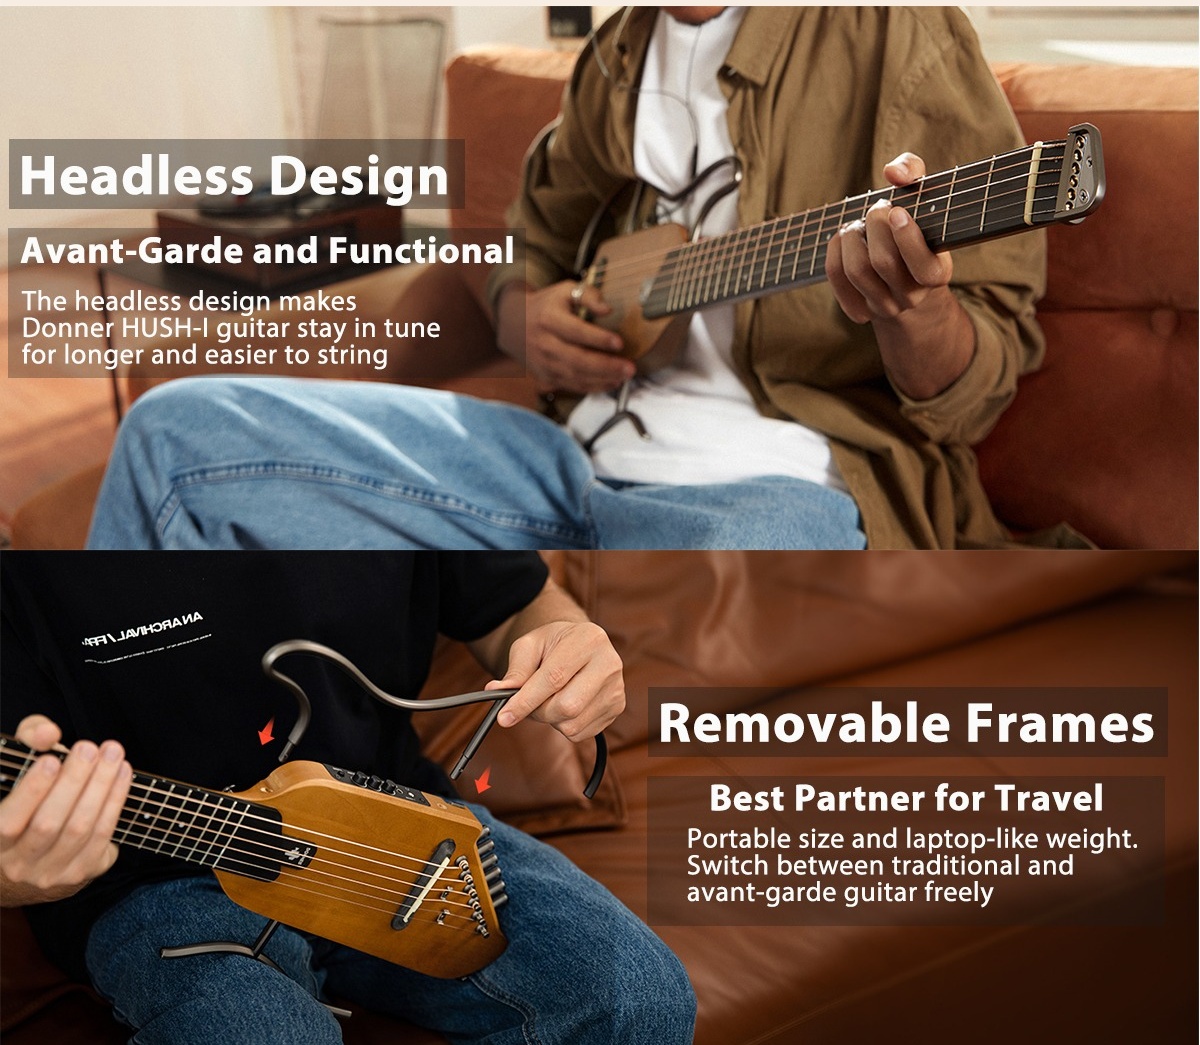  Donner HUSH-I Guitar For Travel - Portable Ultra-Light and  Quiet Performance Headless Acoustic-Electric Guitar, Mahogany Body with  Removable Frames, Gig Bag, and Accessories Natural : Musical Instruments